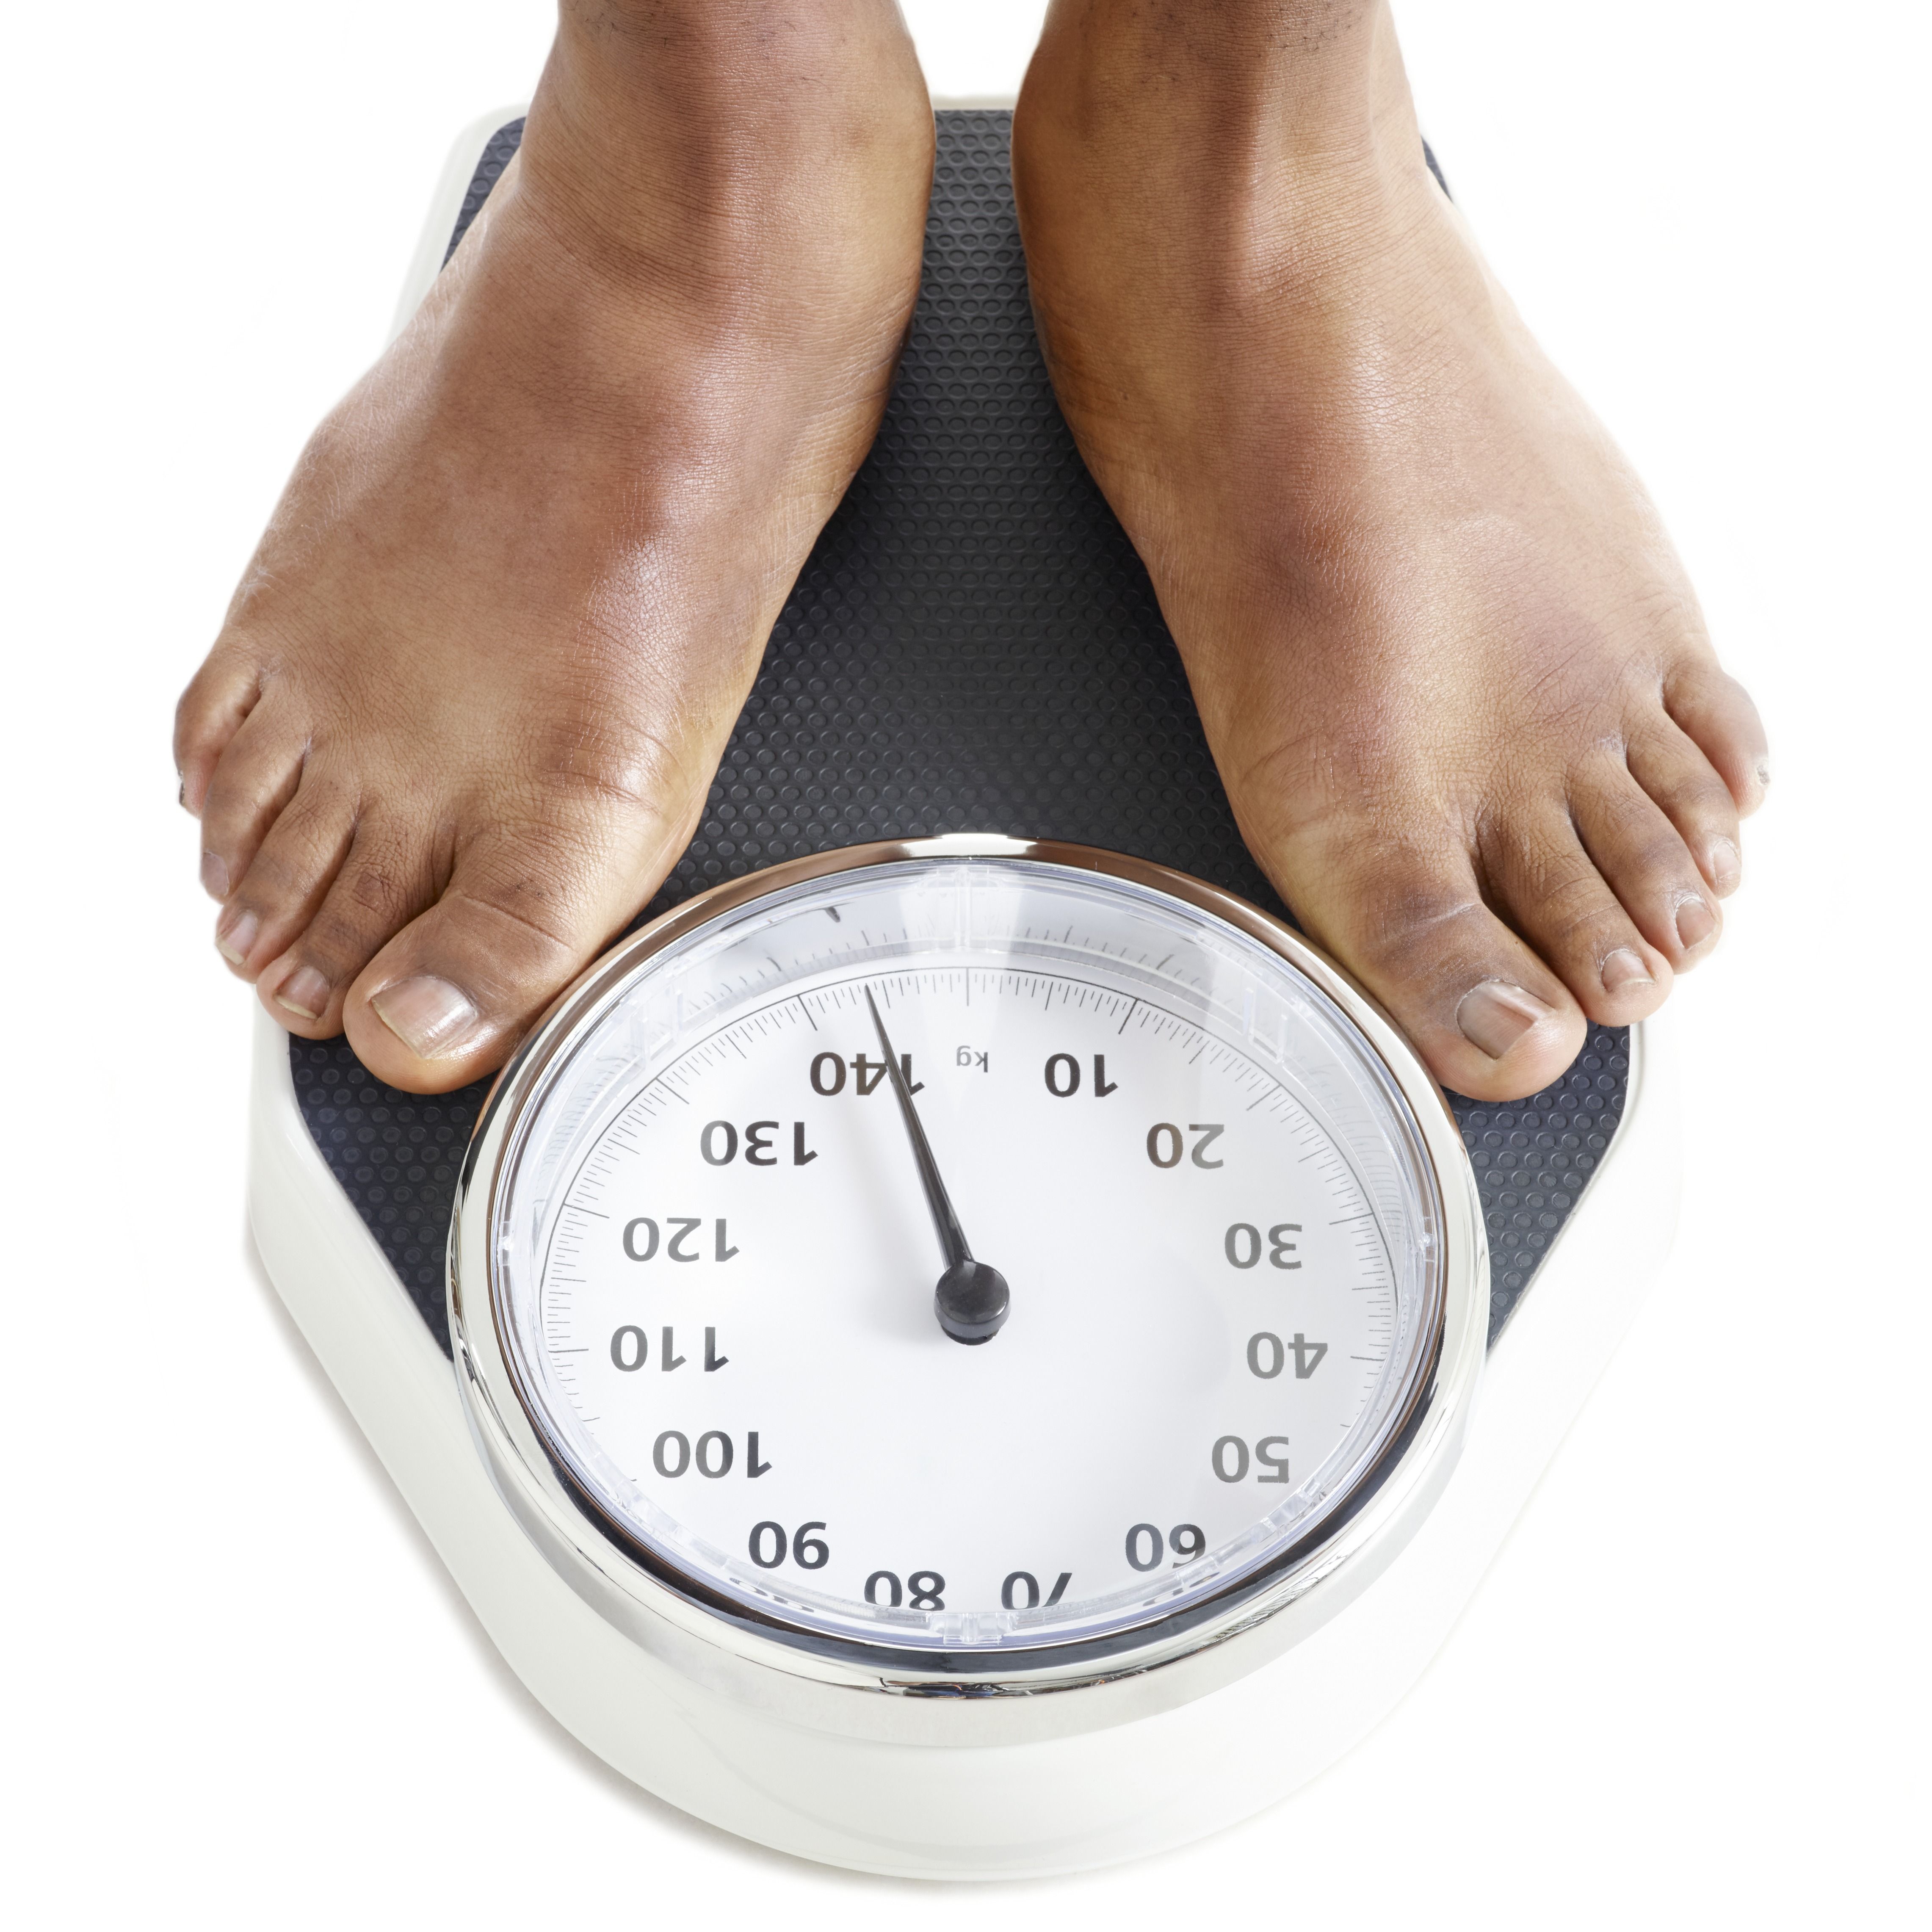 Things That Weigh About 130 Kilograms   Things That Weigh About 130 Kilograms man standing on weighing scales royalty free image 1593466717